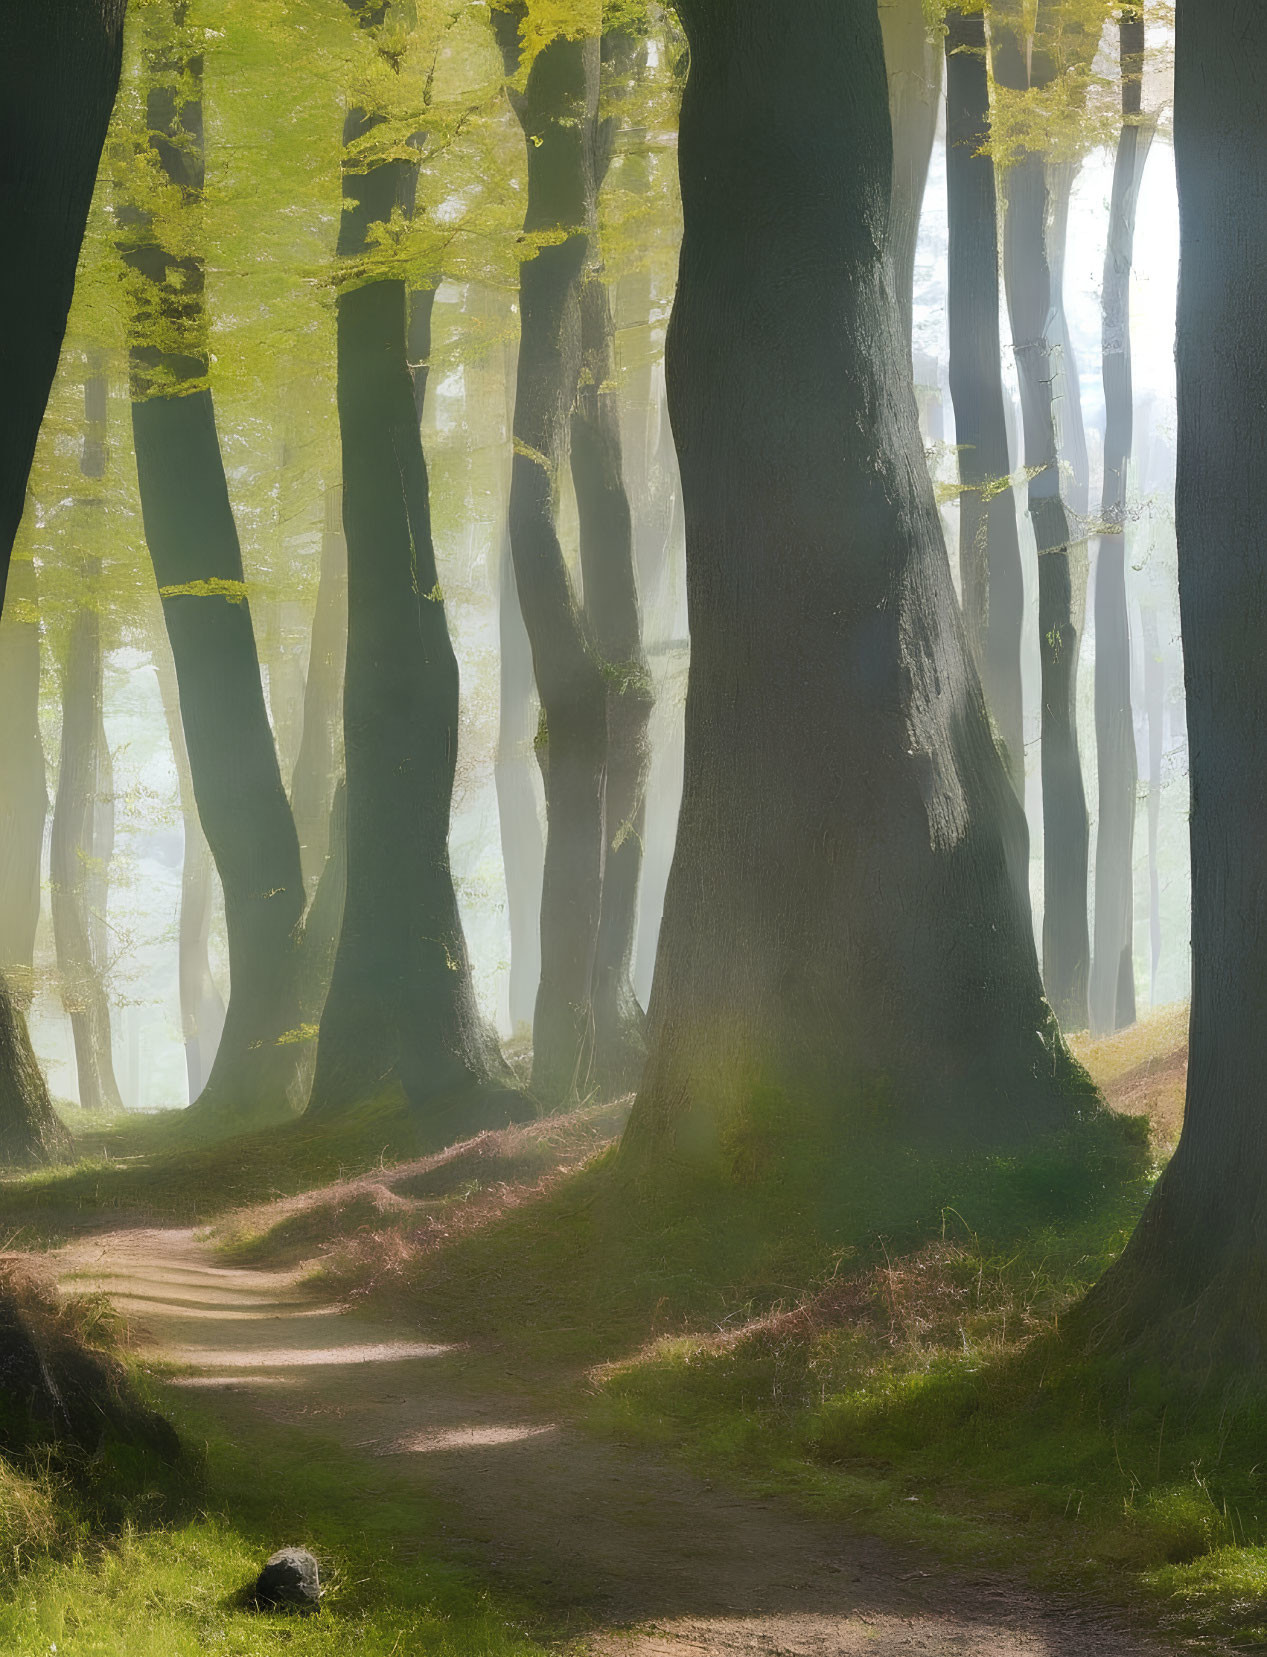 Tranquil Forest Path with Sunlight Filtering Through Tall Trees